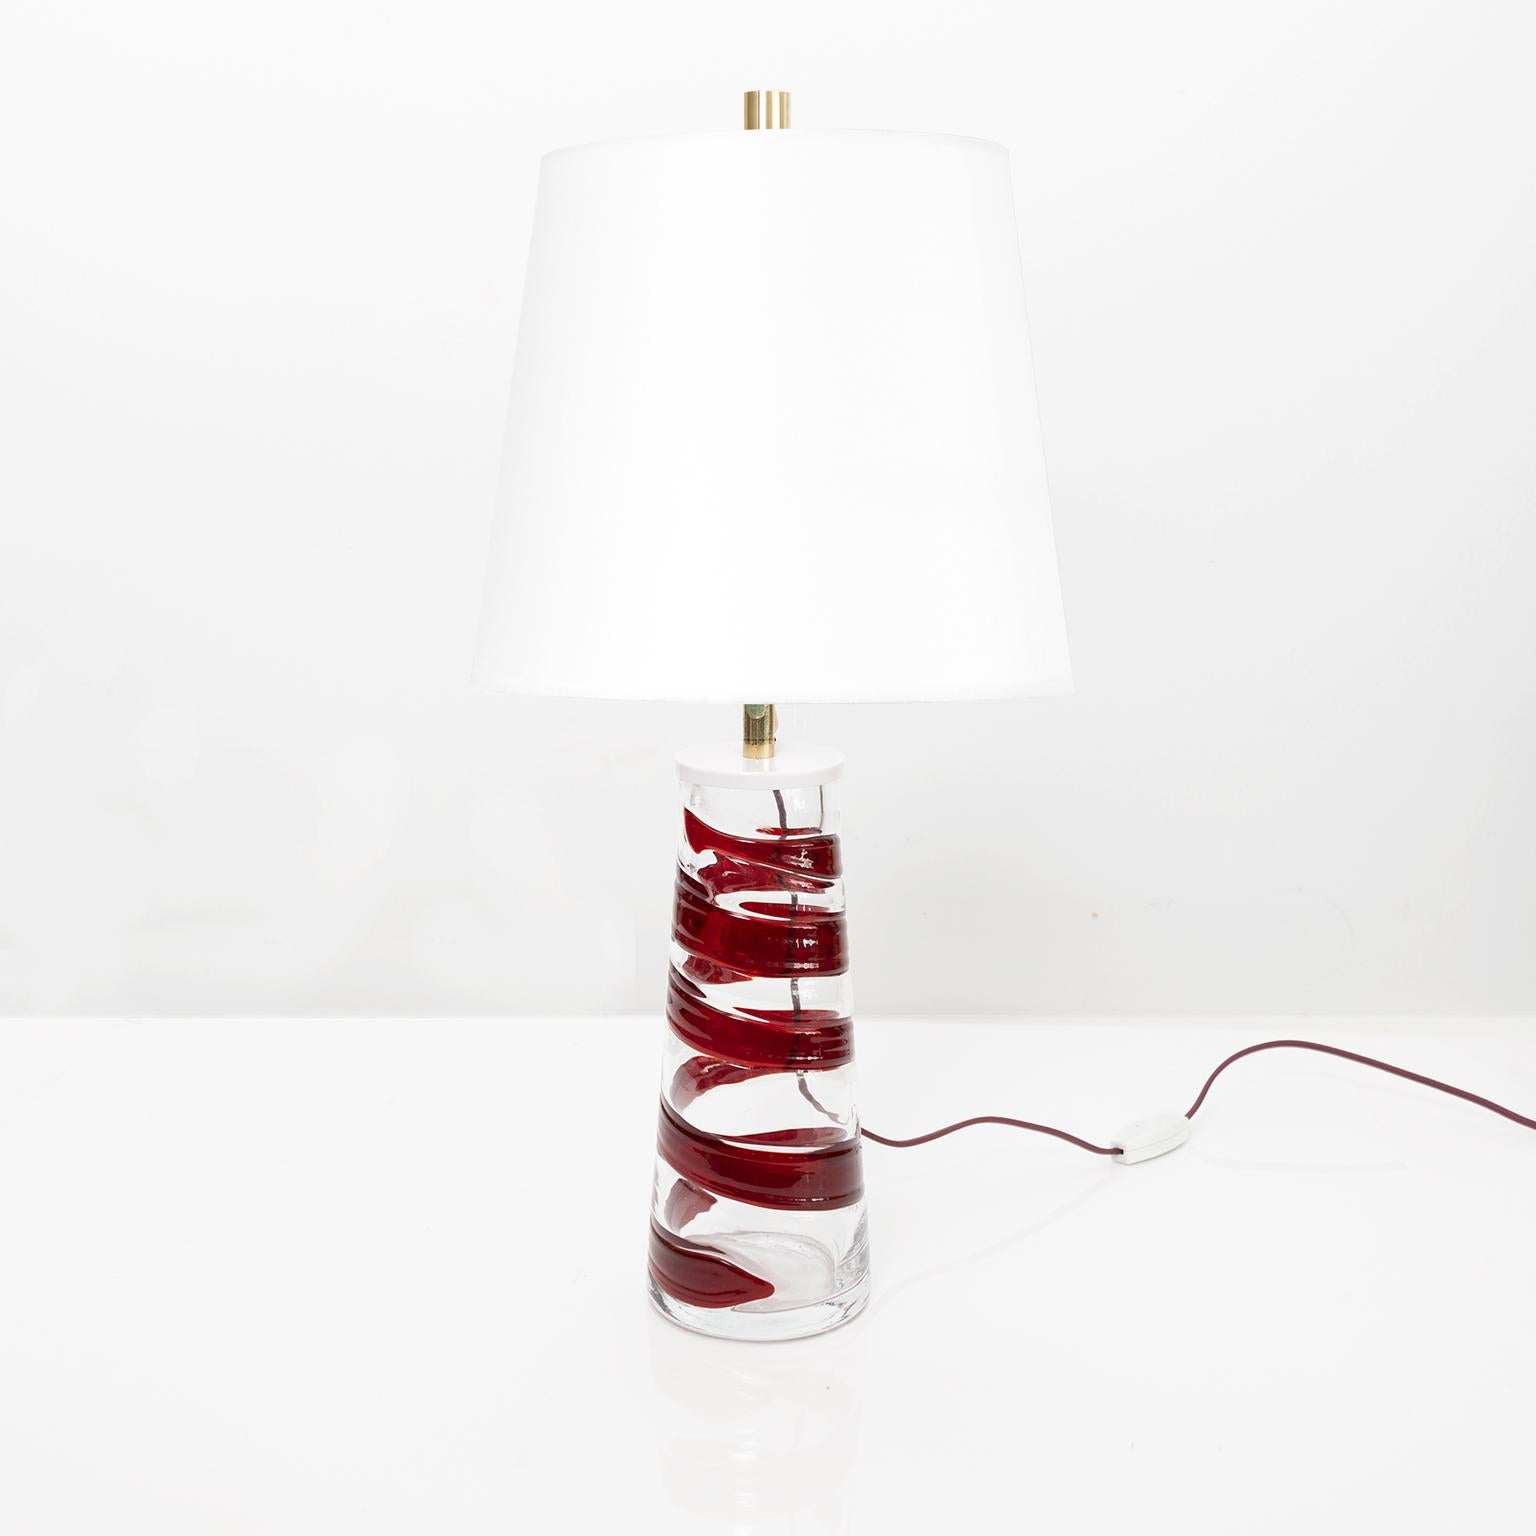 Philips Midcentury clear glass table lamp with spiral band of red glass. Newly re-wired with a single 3-way socket in lightly patinated harp and finial. Shade not included.

Total height: 22.25” body height: 10.5” Diameter: 4.5.